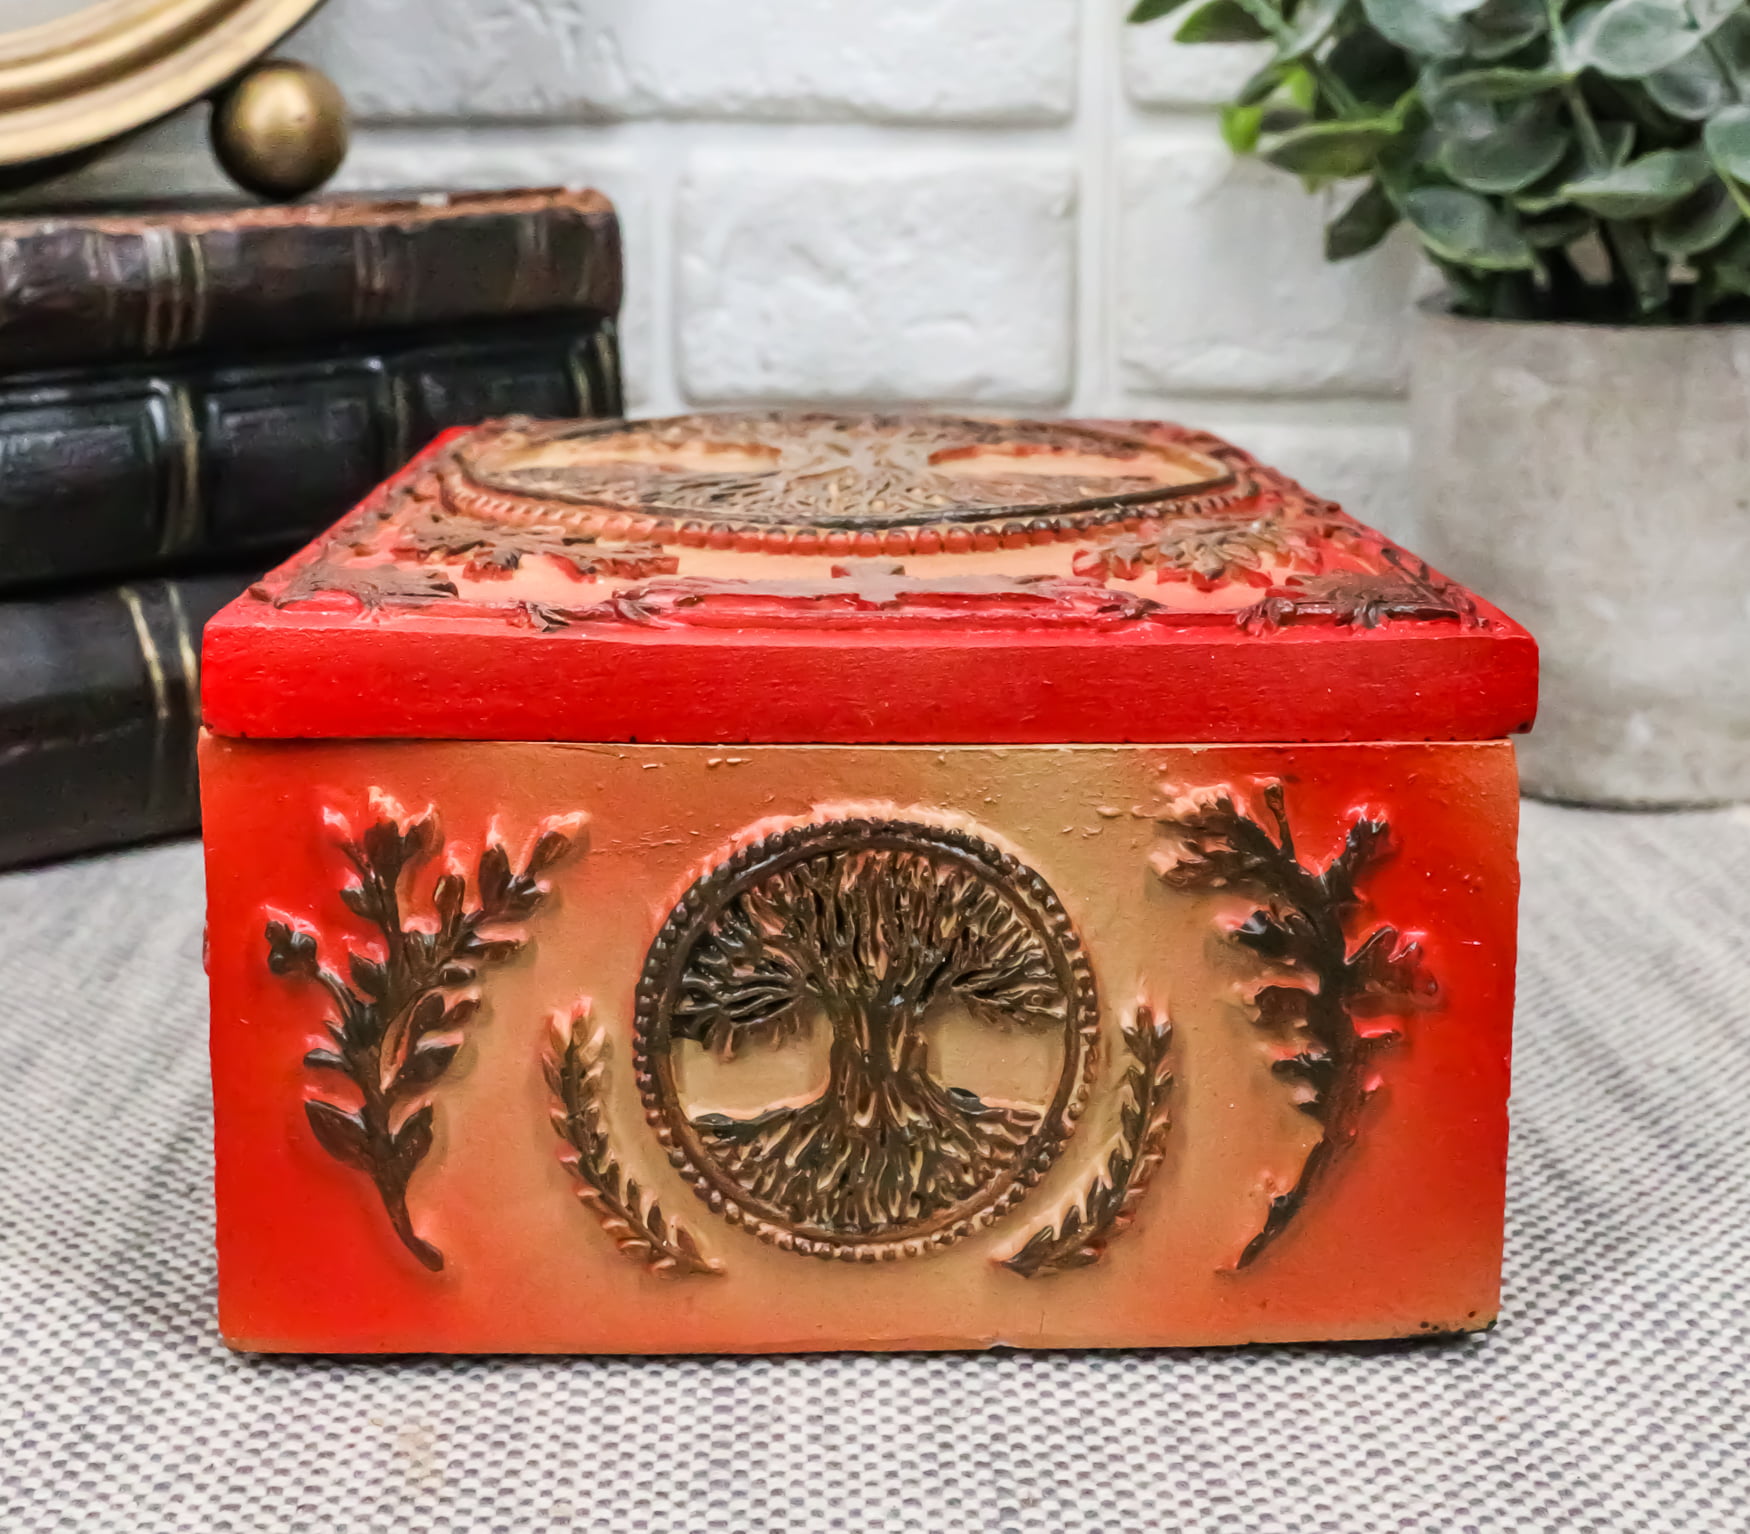 Home Decor for Joy Celtic Cosmic Tree of Life Wicca Tarot Cards Crystals Herbs Stash Decorative Box 